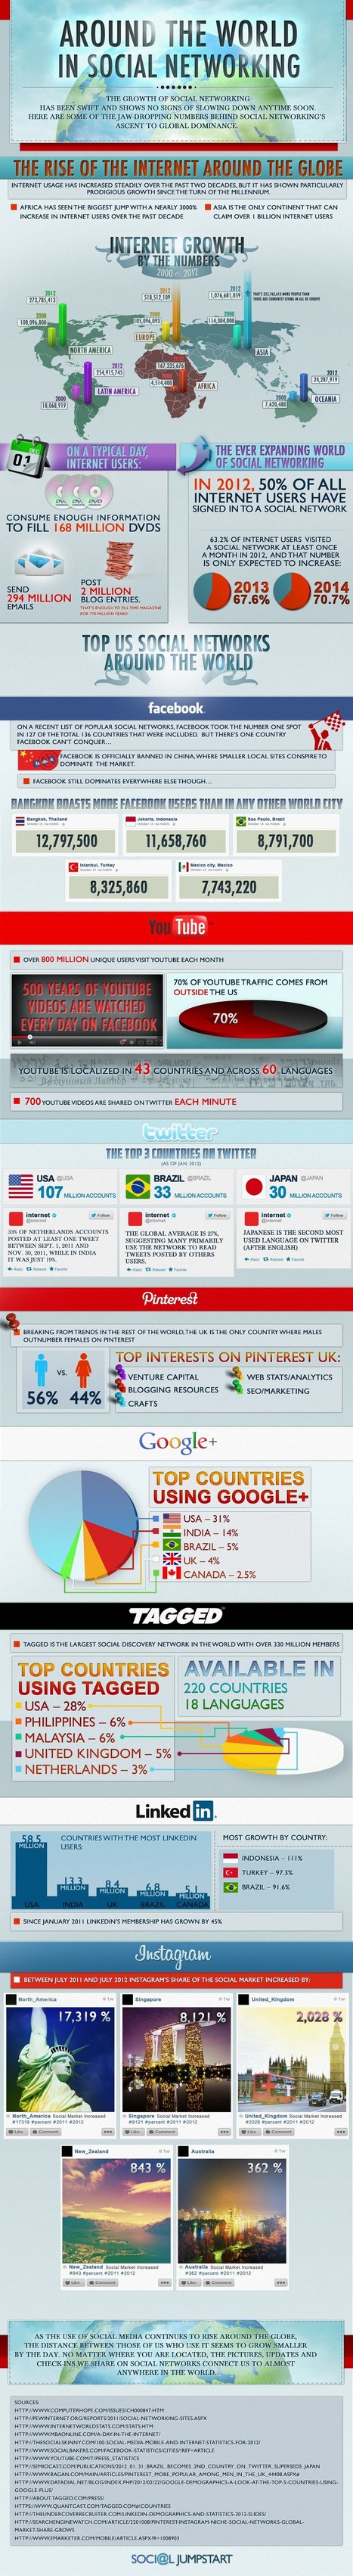 Social Media Around the World: A Complete Infographic Guide | #eHealthPromotion, #SaluteSocial | Scoop.it